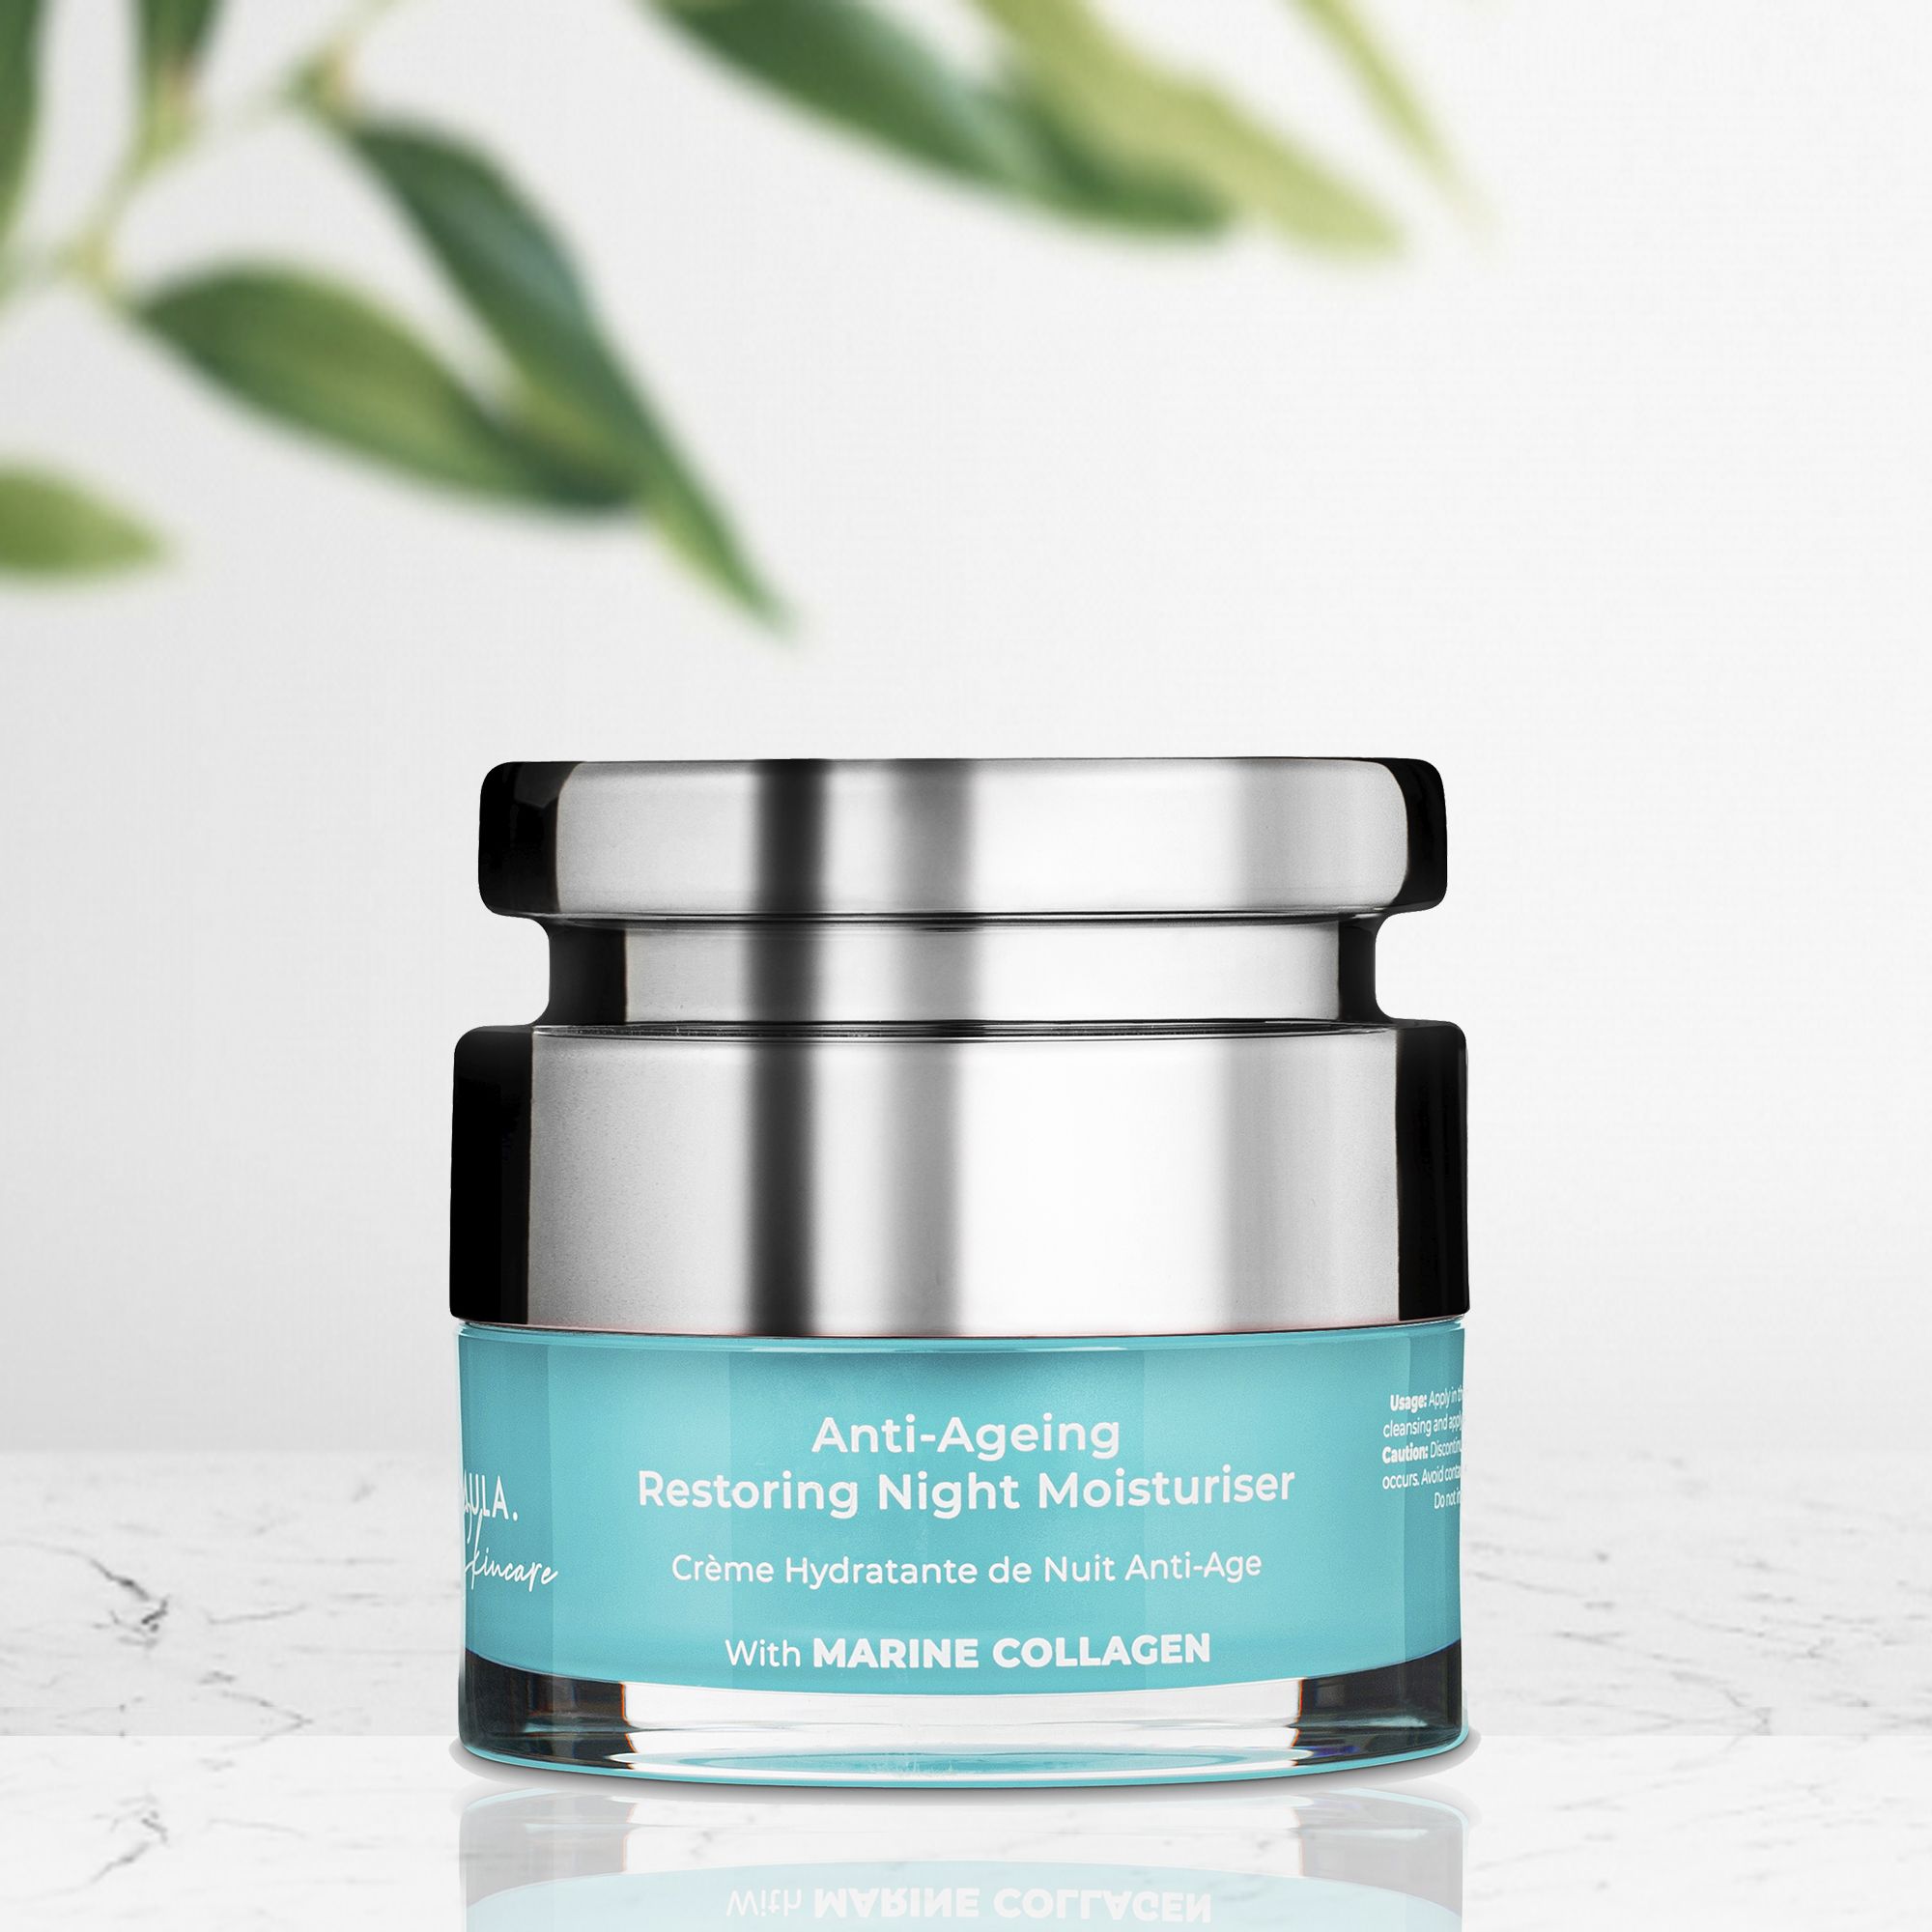 Our Marine Collagen range is predominantly focused on
anti-ageing skincare. Our star ingredient, Marine Collagen
Amino Acid, has numerous scientifically proven benefits
on our skin.